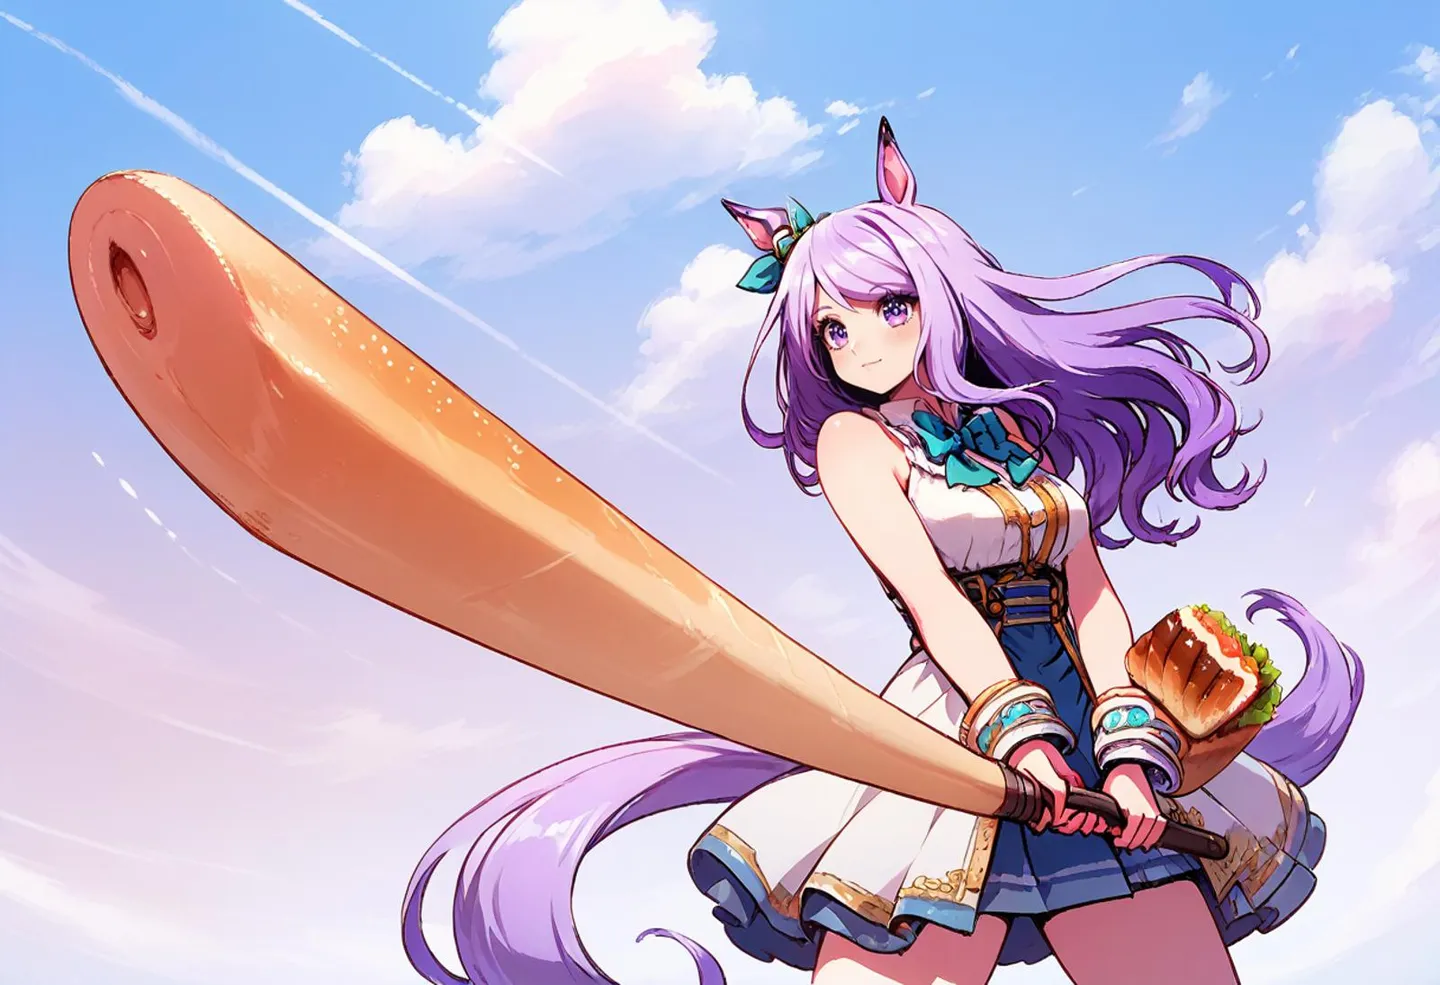 Anime girl with purple hair holding a giant bat, dressed in a detailed outfit beneath a clear blue sky with clouds. This is an AI generated image using stable diffusion.